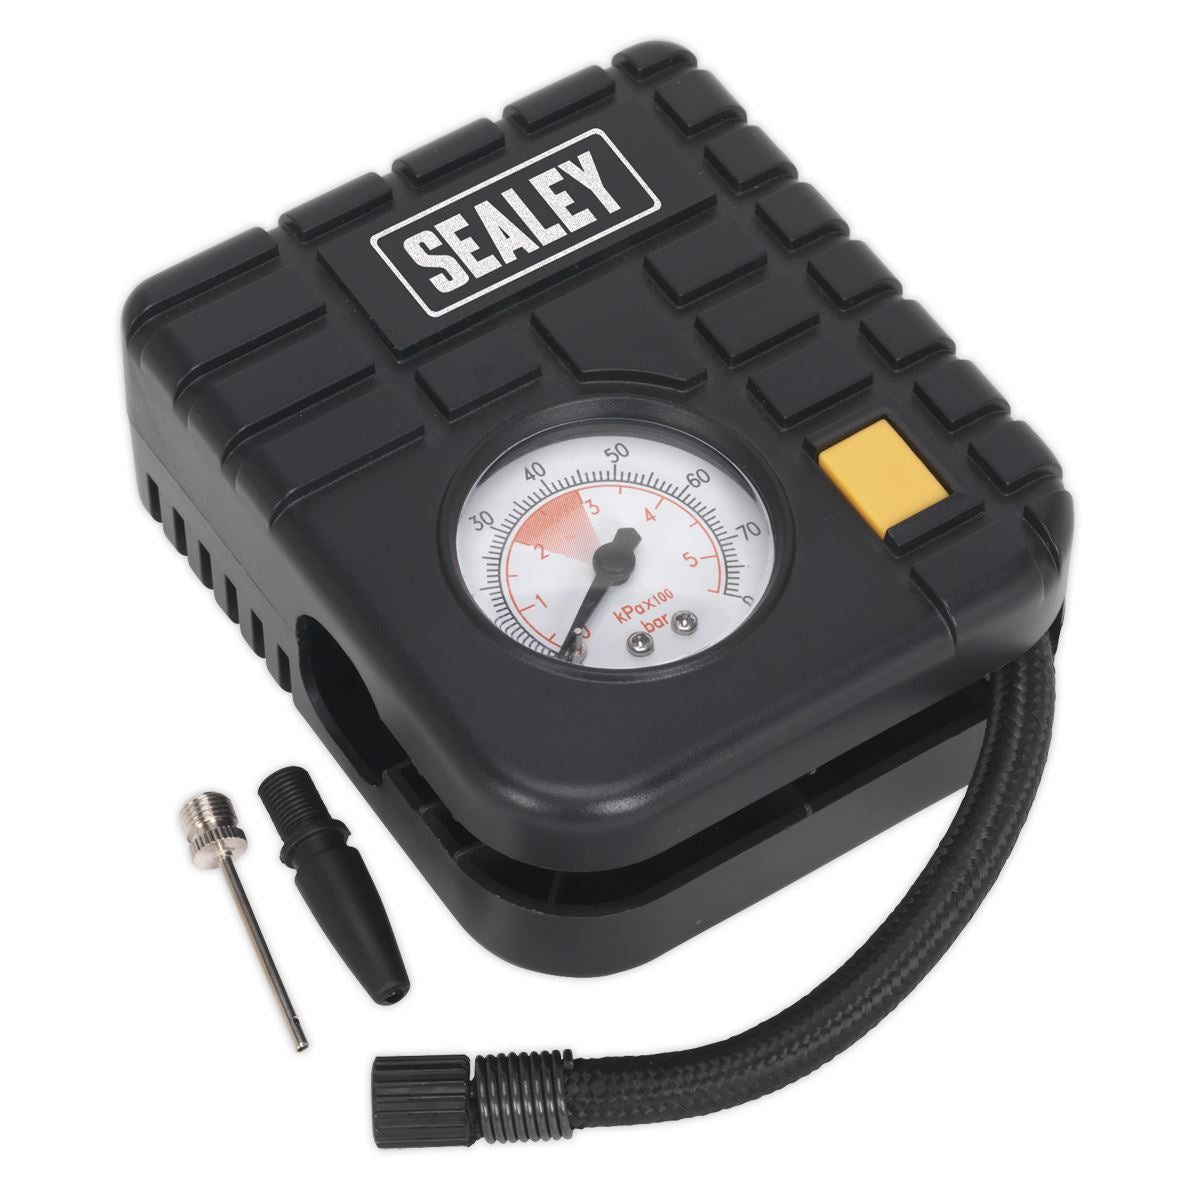 Sealey Micro Air Compressor with Worklight 12V